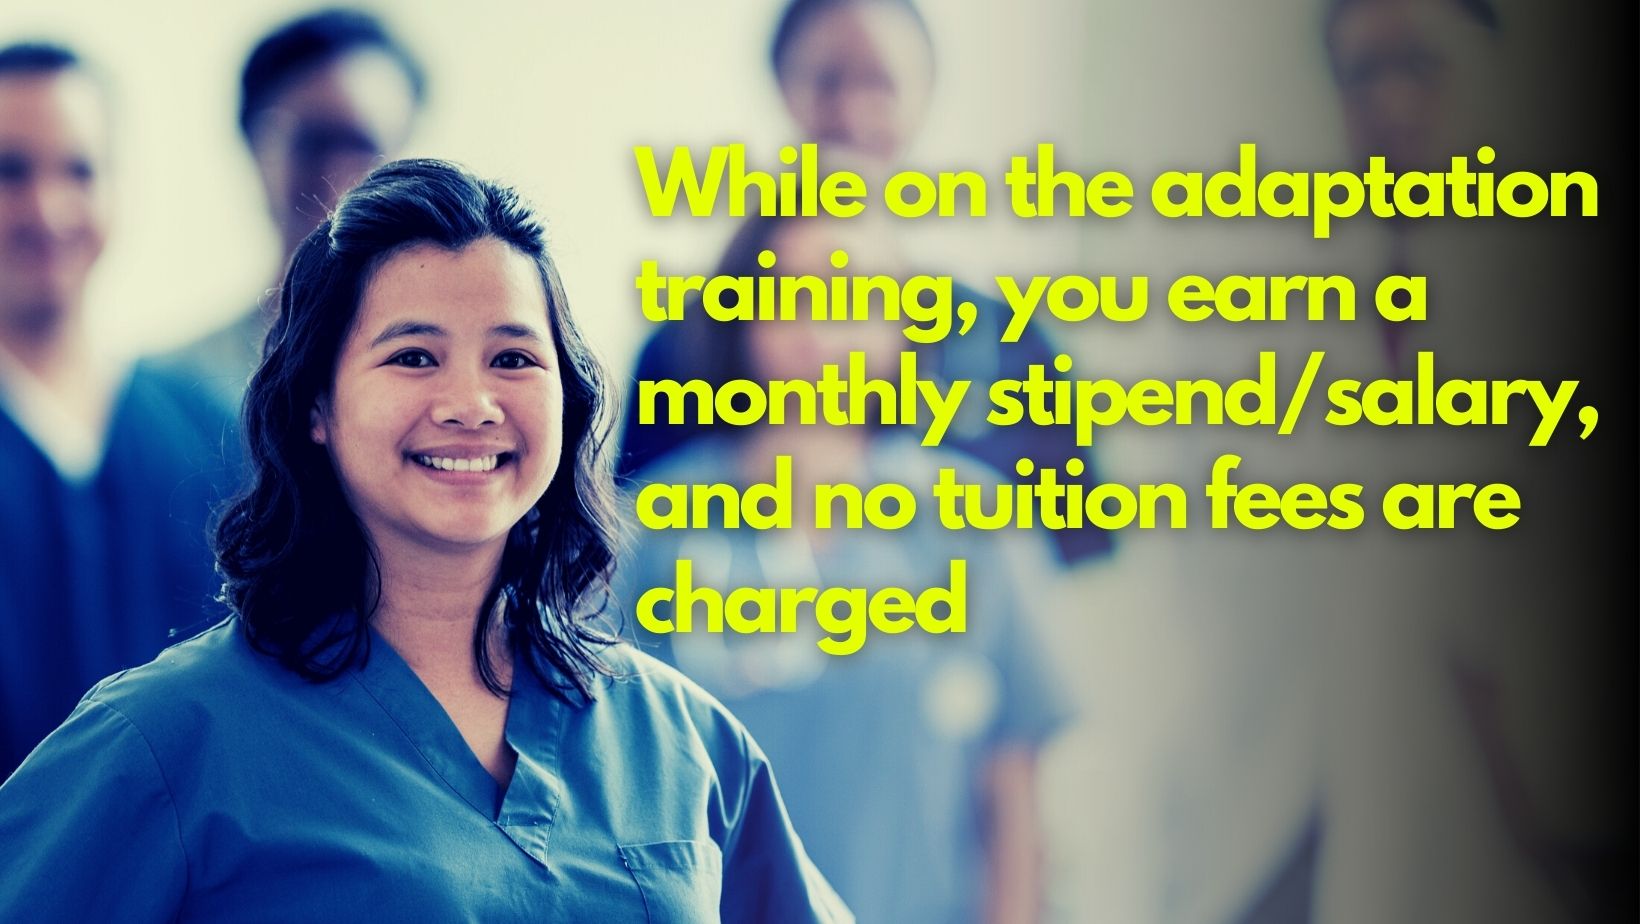 While on the adaptation training, you earn a monthly stipendsalary, and no tuition fees are charged